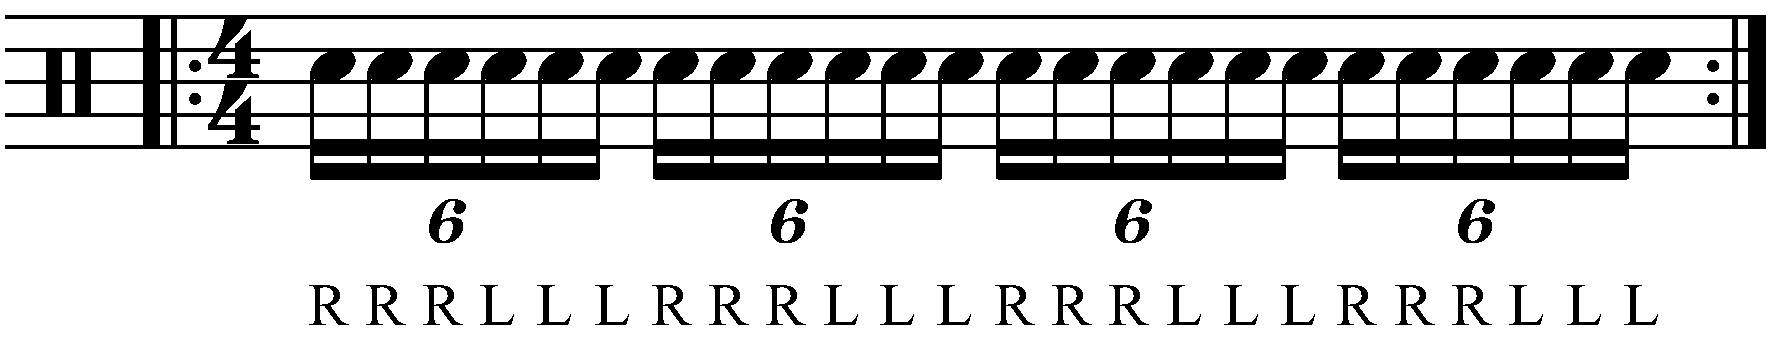 A triplet played with triple strokes.